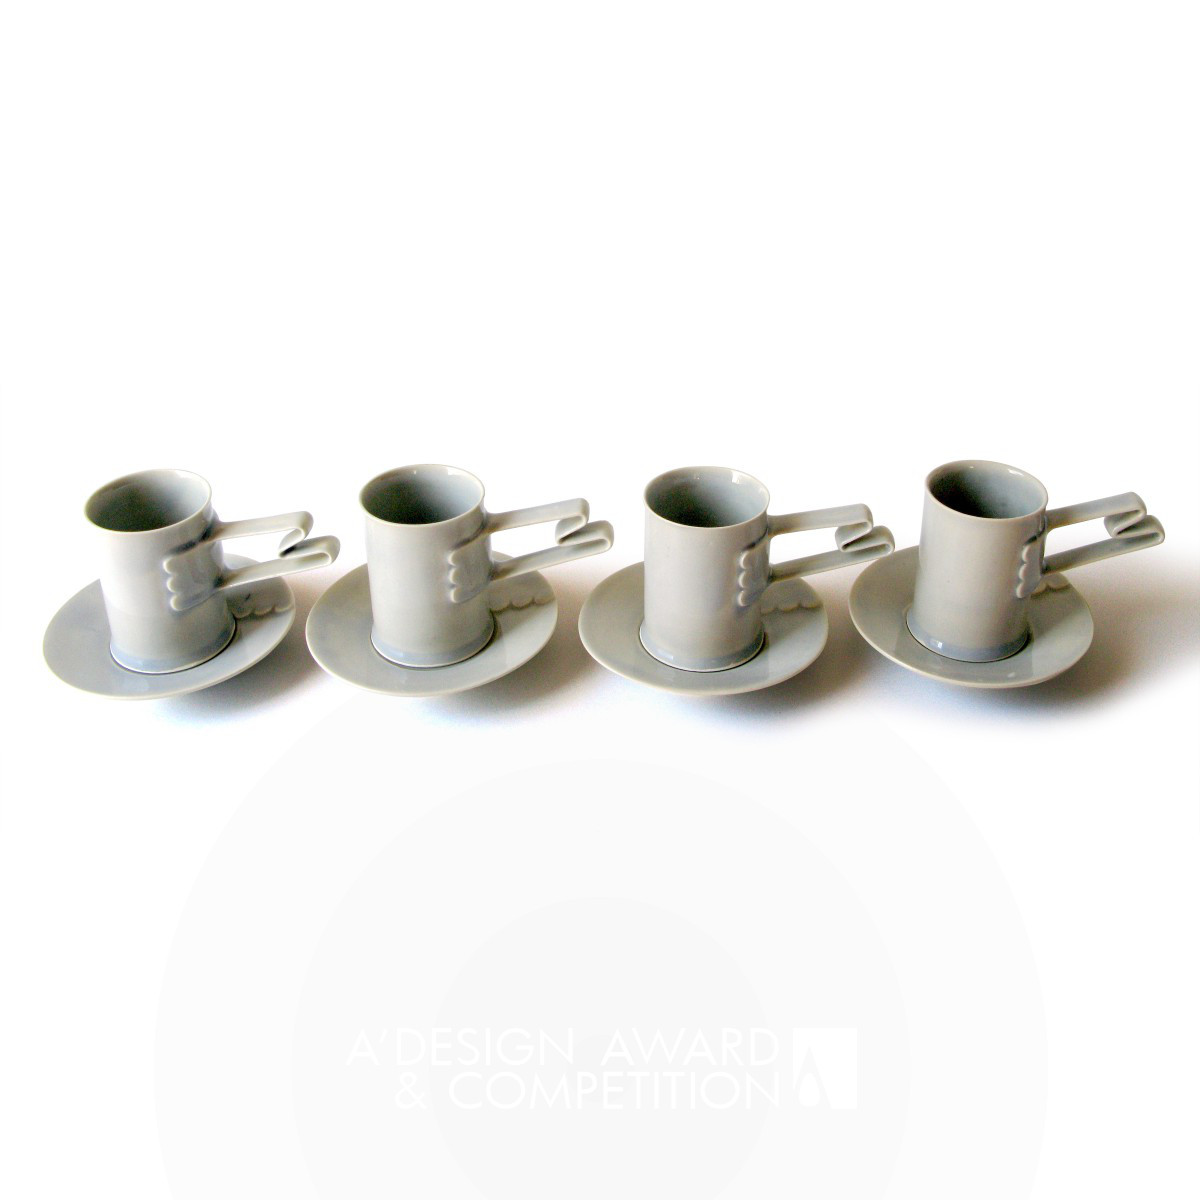 Turkish Coffe Cup Table Ware